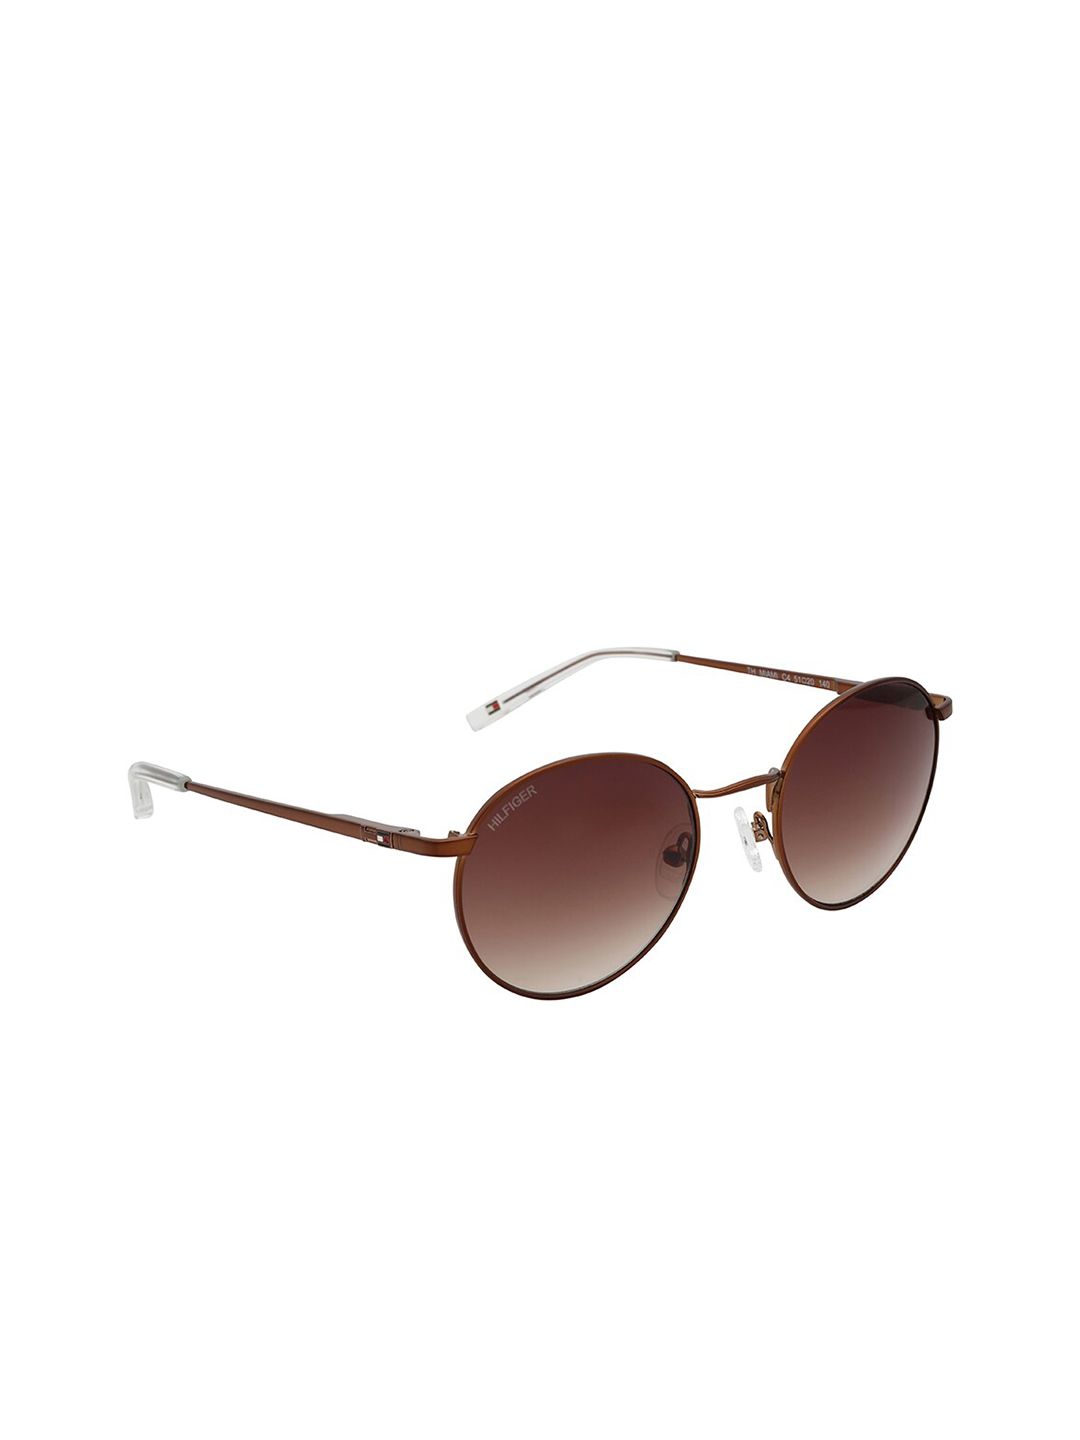 Tommy Hilfiger Unisex Brown Lens & Round Sunglasses with UV Protected Lens TH Miami C4 51 Price in India